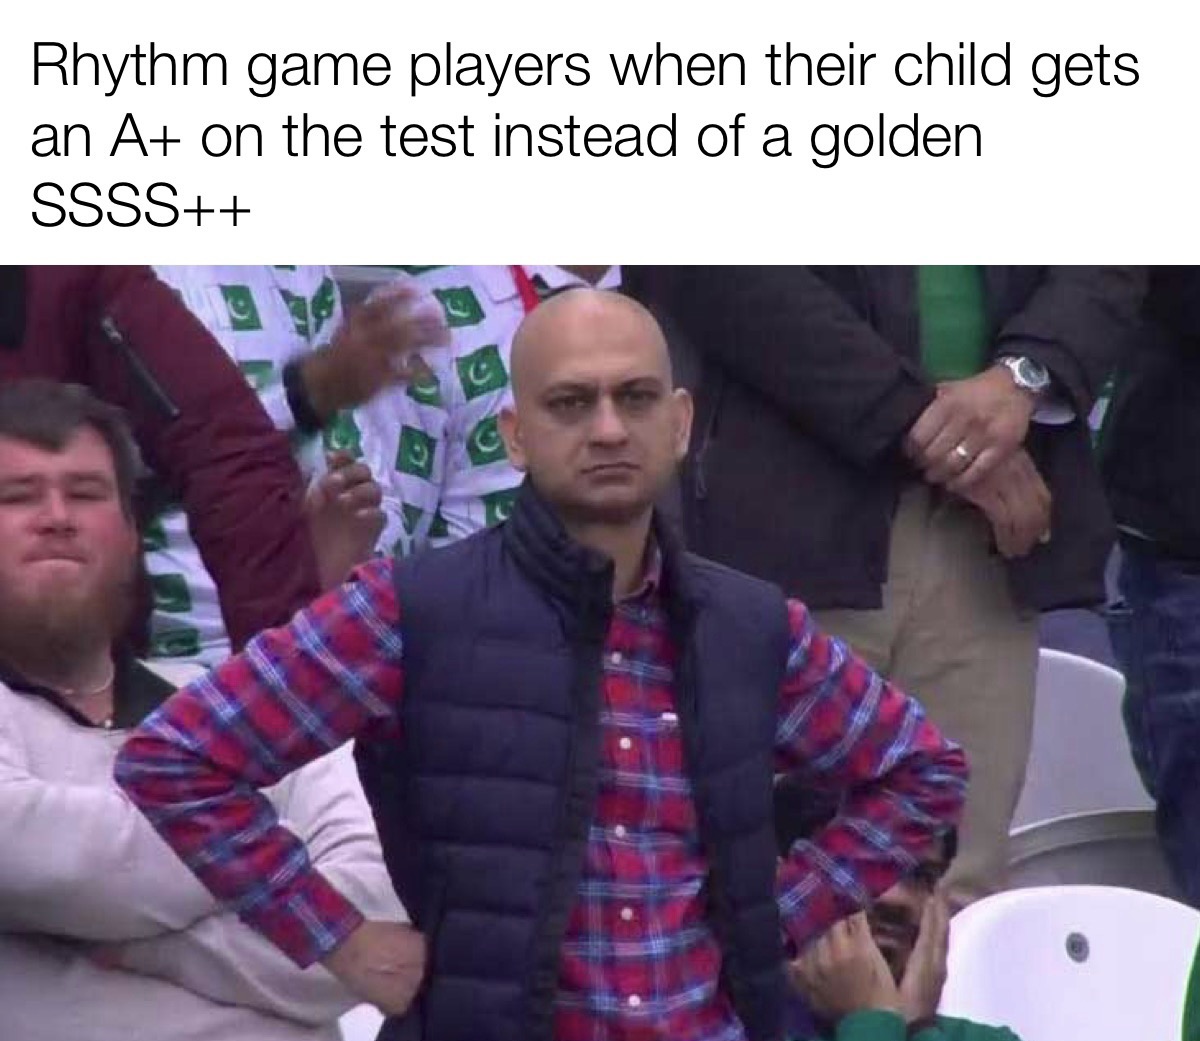 gaming memes - hospice nurse meme - Rhythm game players when their child gets an A on the test instead of a golden Ssss